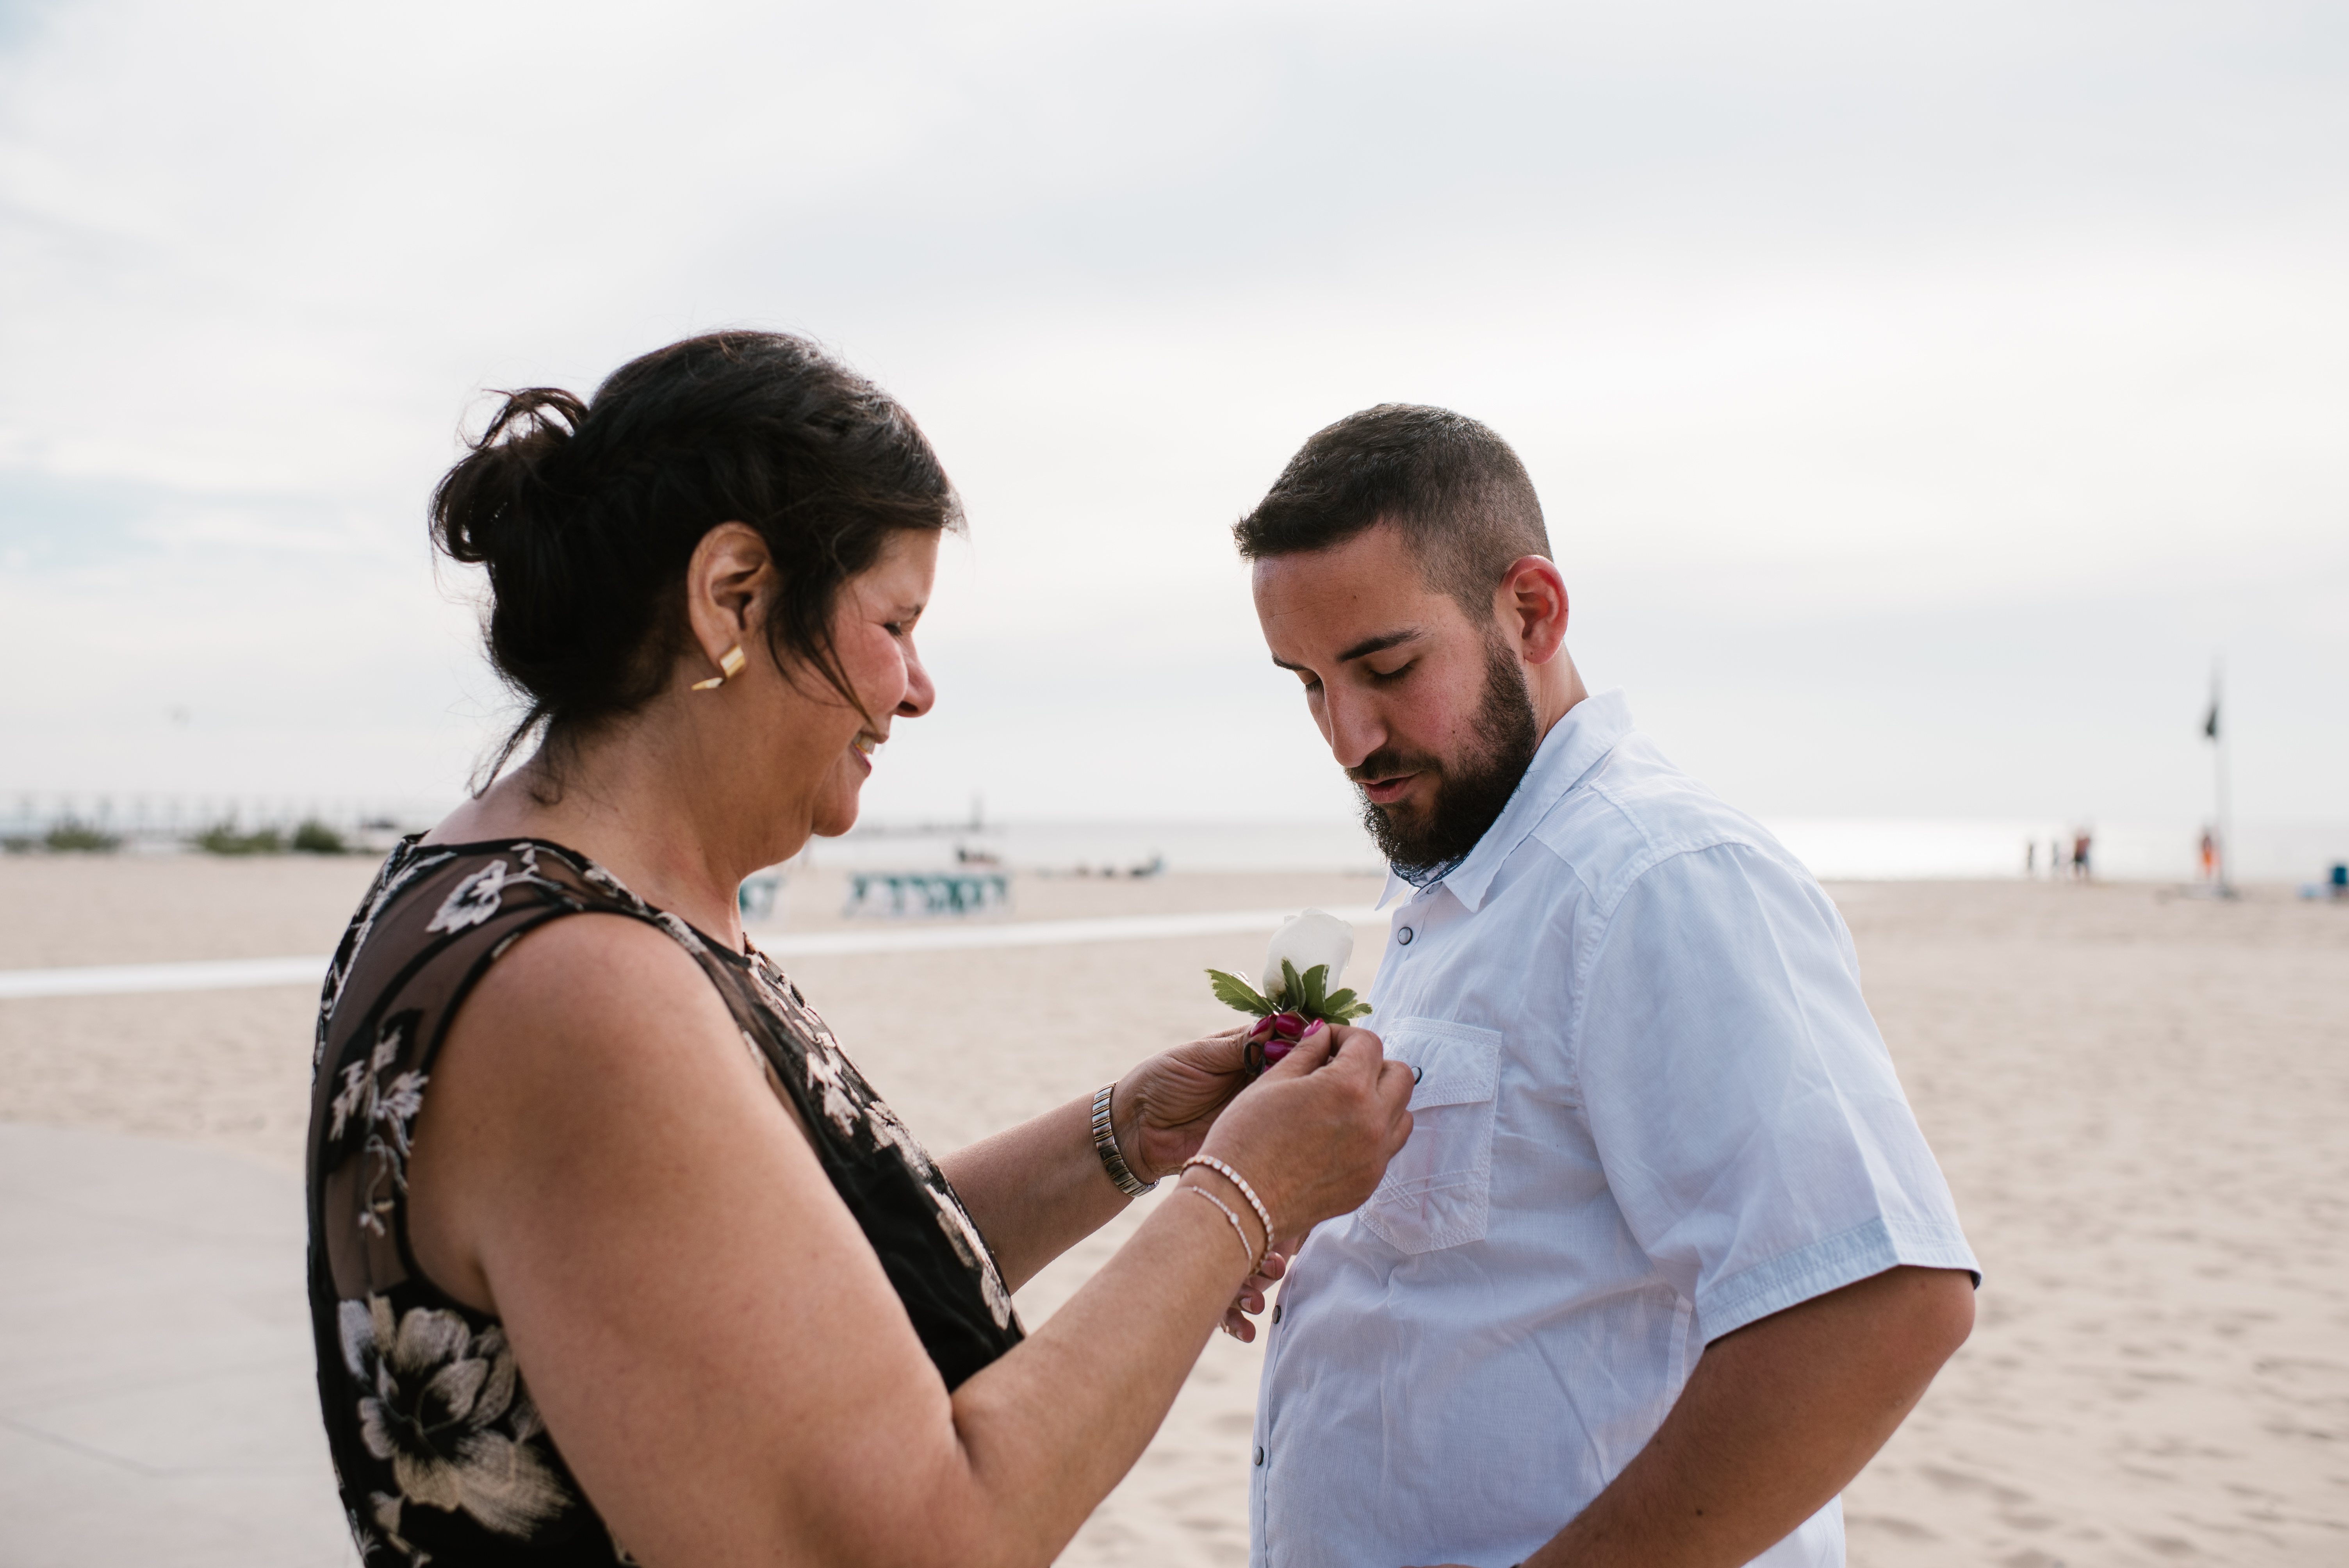 mom pinning a bout on son's shirt at his north beach wedding